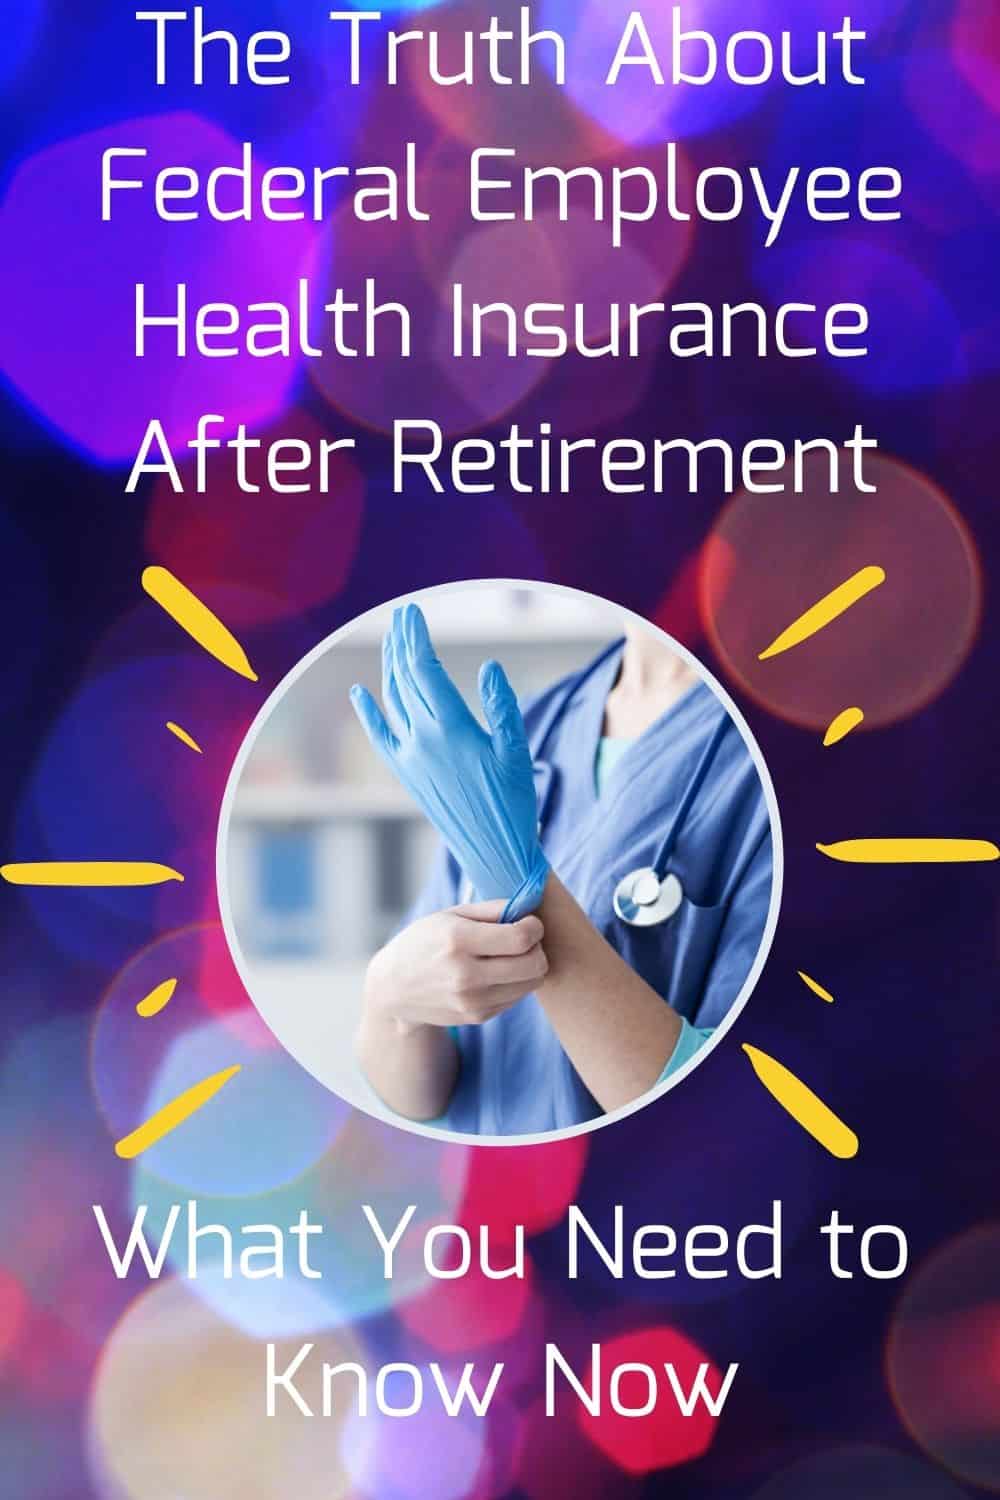 The Truth About Federal Employee Health Insurance After Retirement- What You Need to Know Now